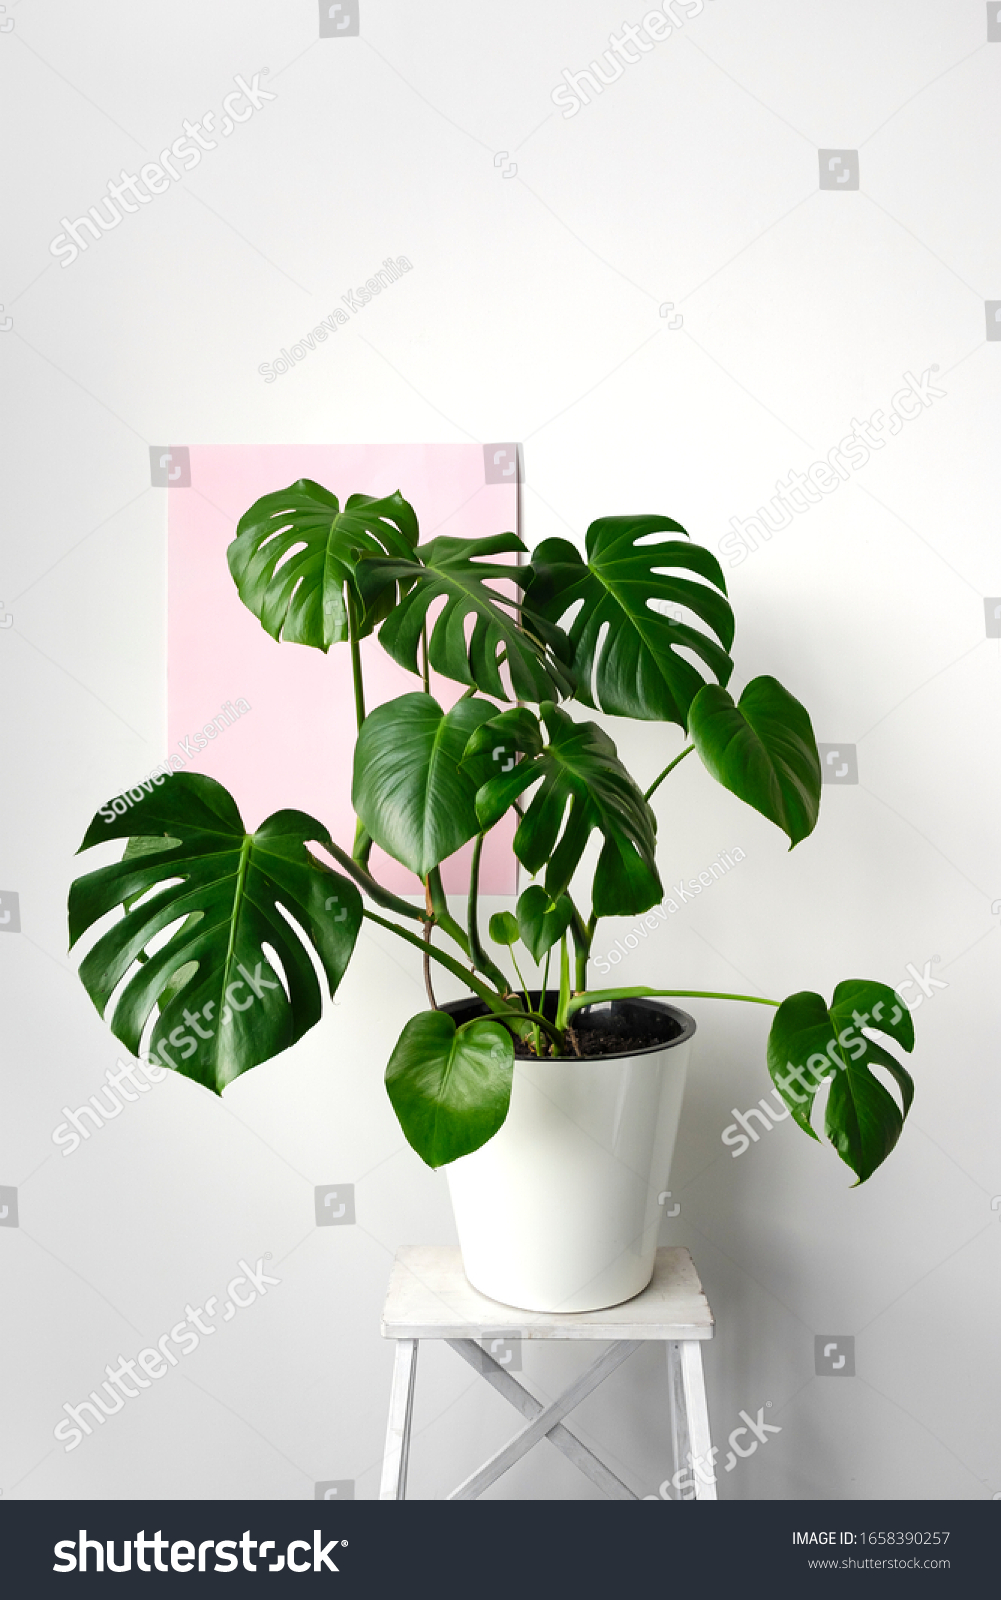 Beautiful monstera flower in a white pot standing on a white wooden stand on a white and pink background. The concept of minimalism. Hipster scandinavian style room interior.  #1658390257